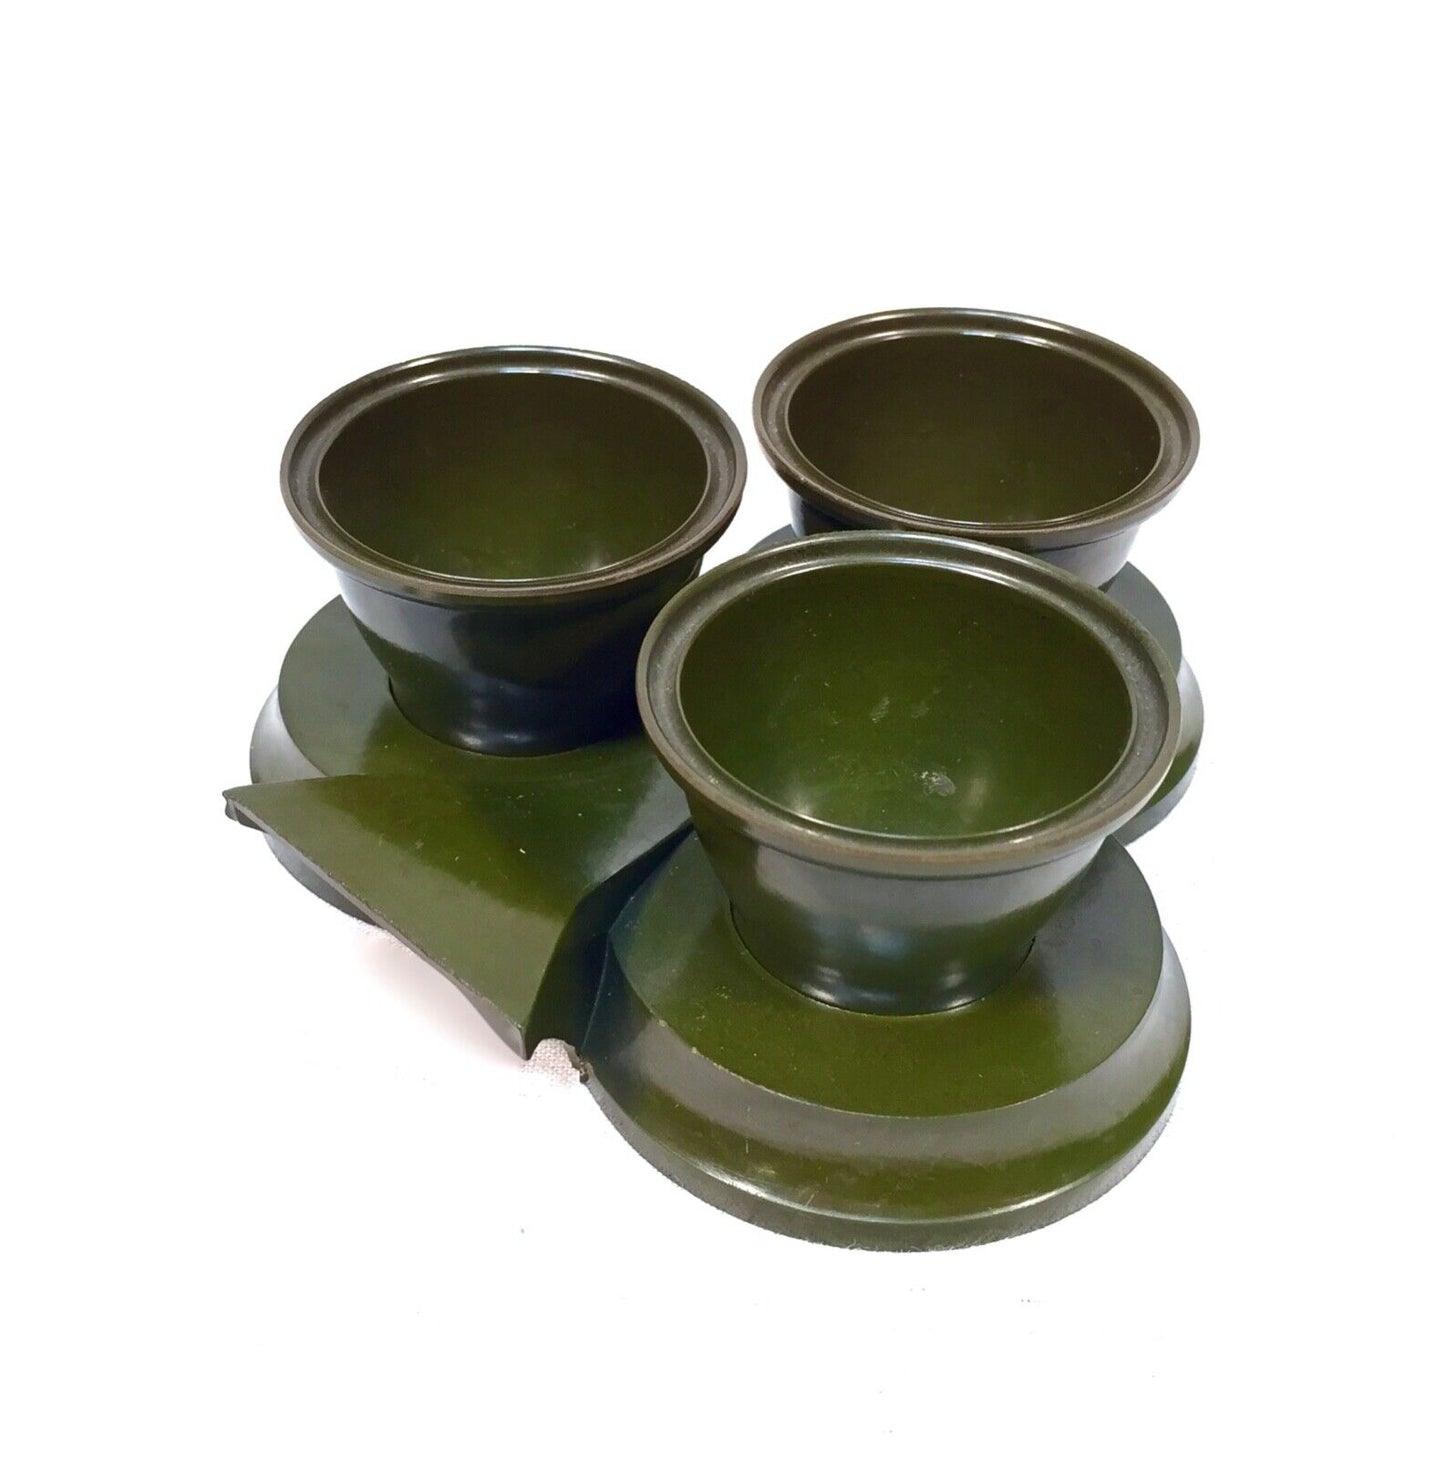 Antique Art Deco Green Bakelite Egg Cup Set on Stand in Shape of Clover / Club